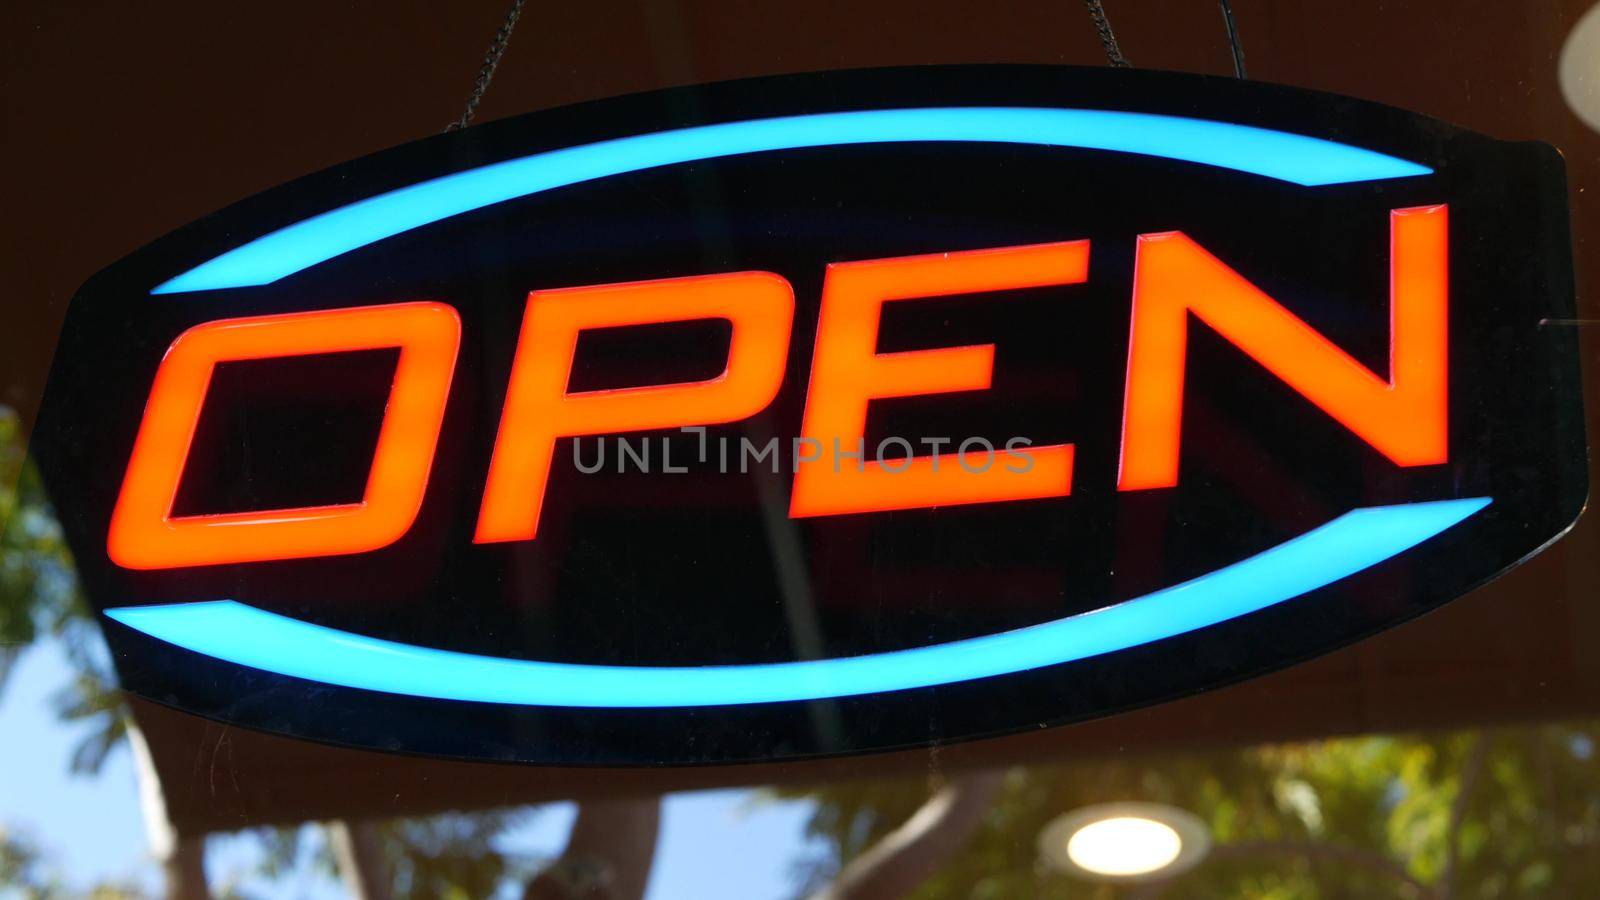 Open neon sign glowing in the dark. Vivid retro styled text at entrance on glass window. Colorful electric banner selective focus close up. Light bulbs radiance at night. Shiny illuminated lettering.